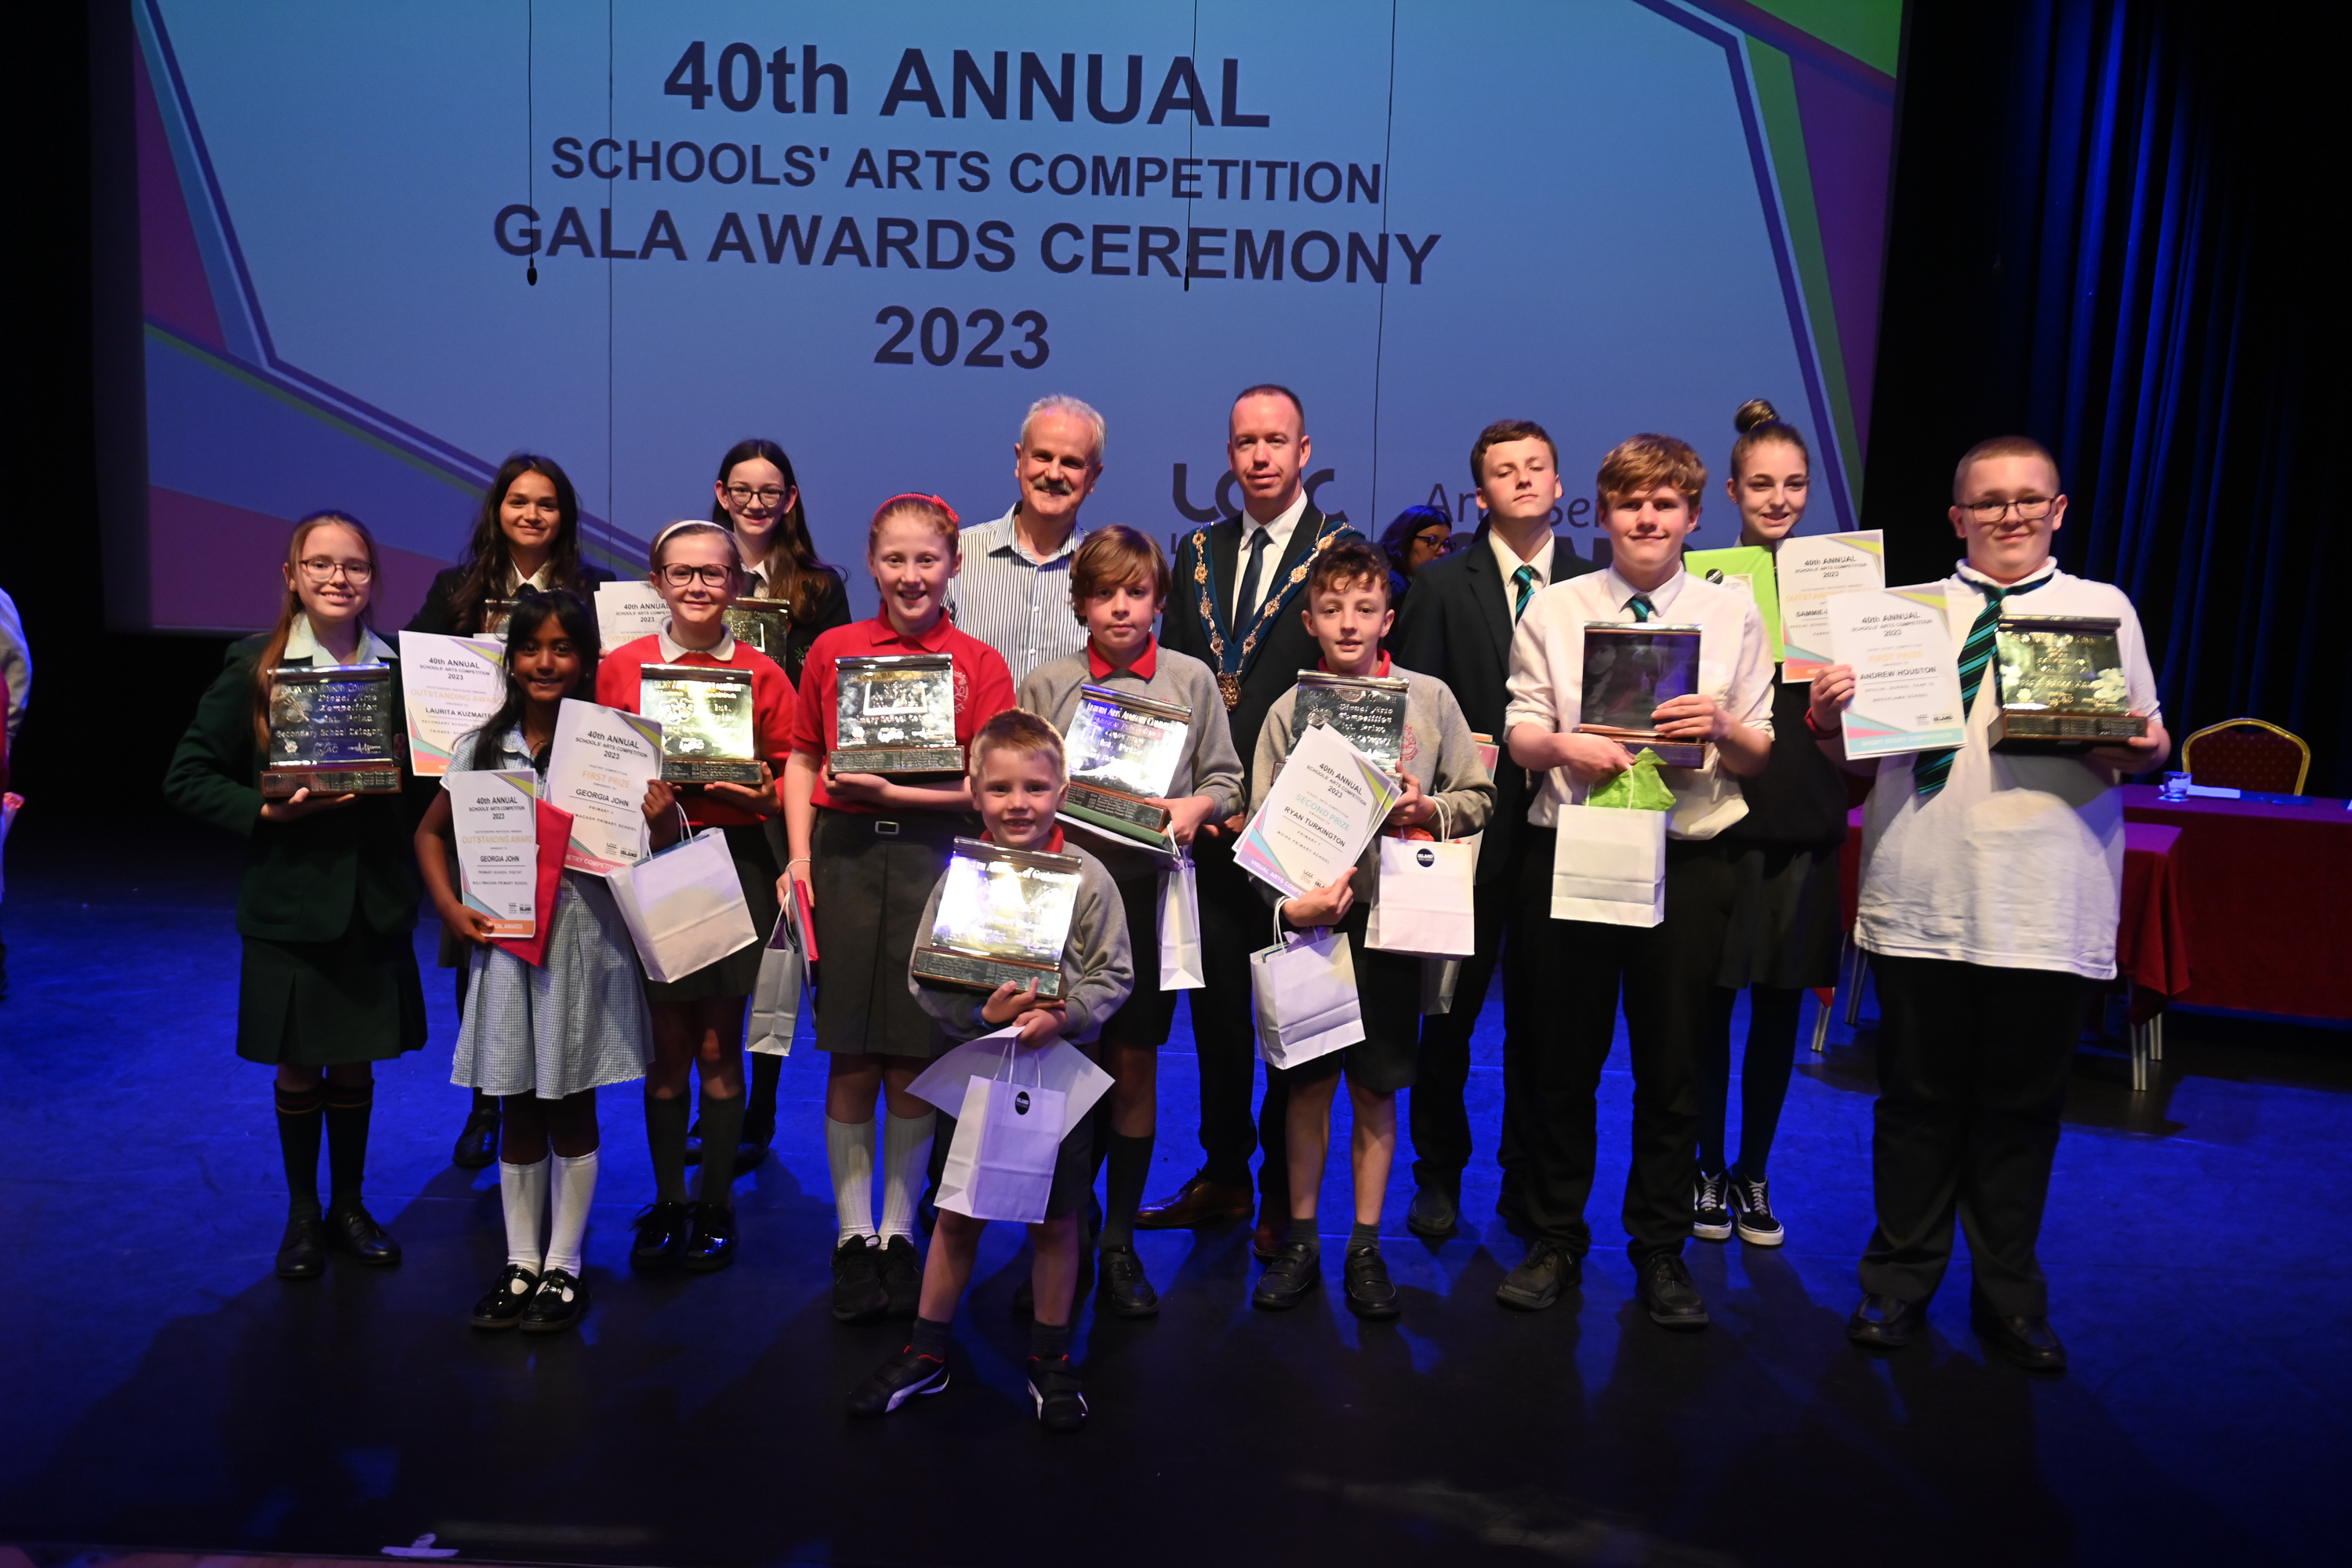 Schools Arts Competition | Gala Awards Ceremony